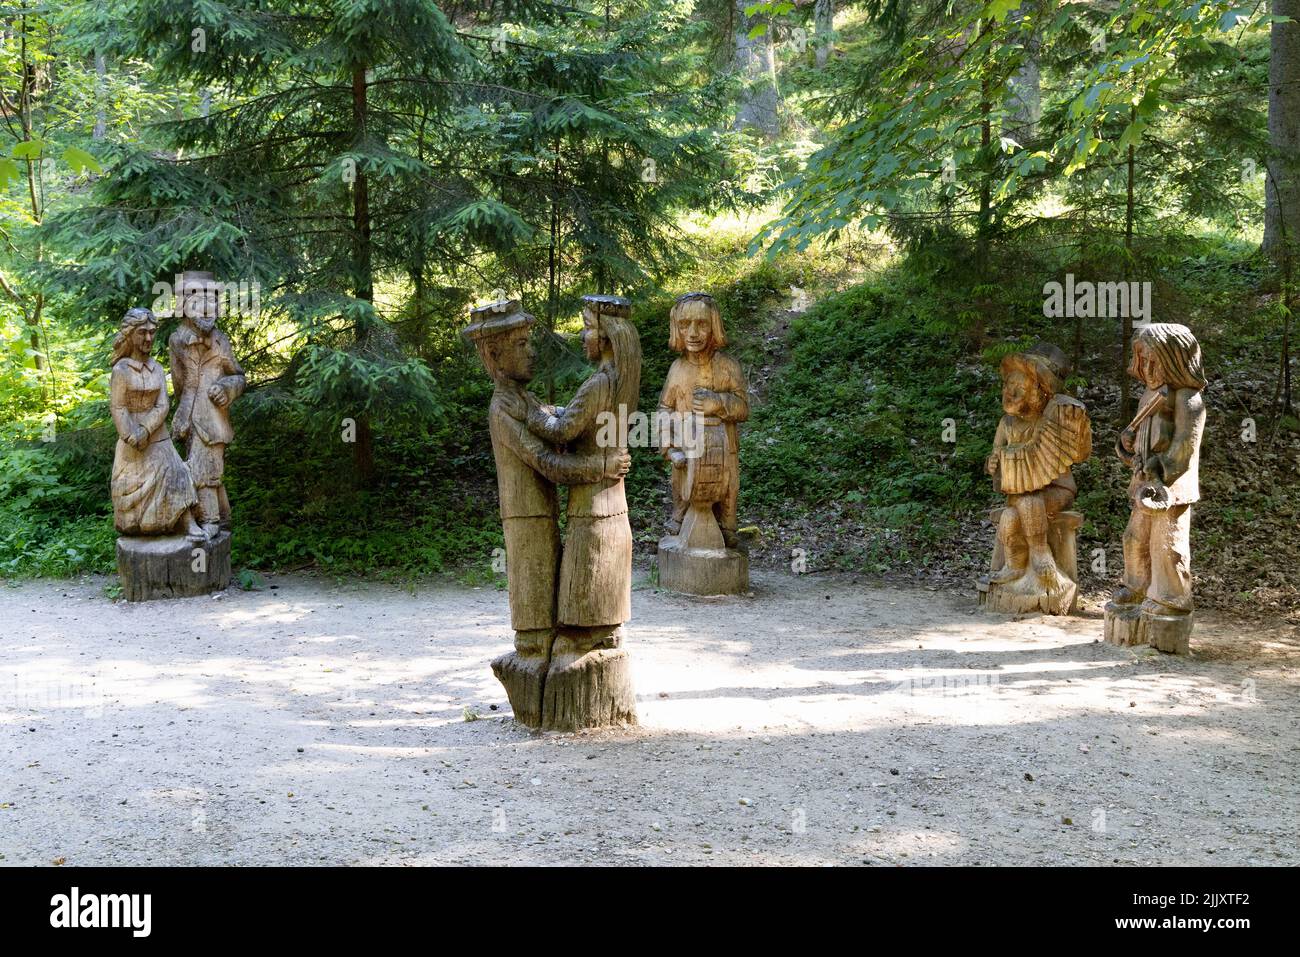 Wedding Party; Hill of Witches outdoor sculpture trail with about 80 traditional pagan wooden statues, Curonian Spit National Park, Lithuania Europe Stock Photo